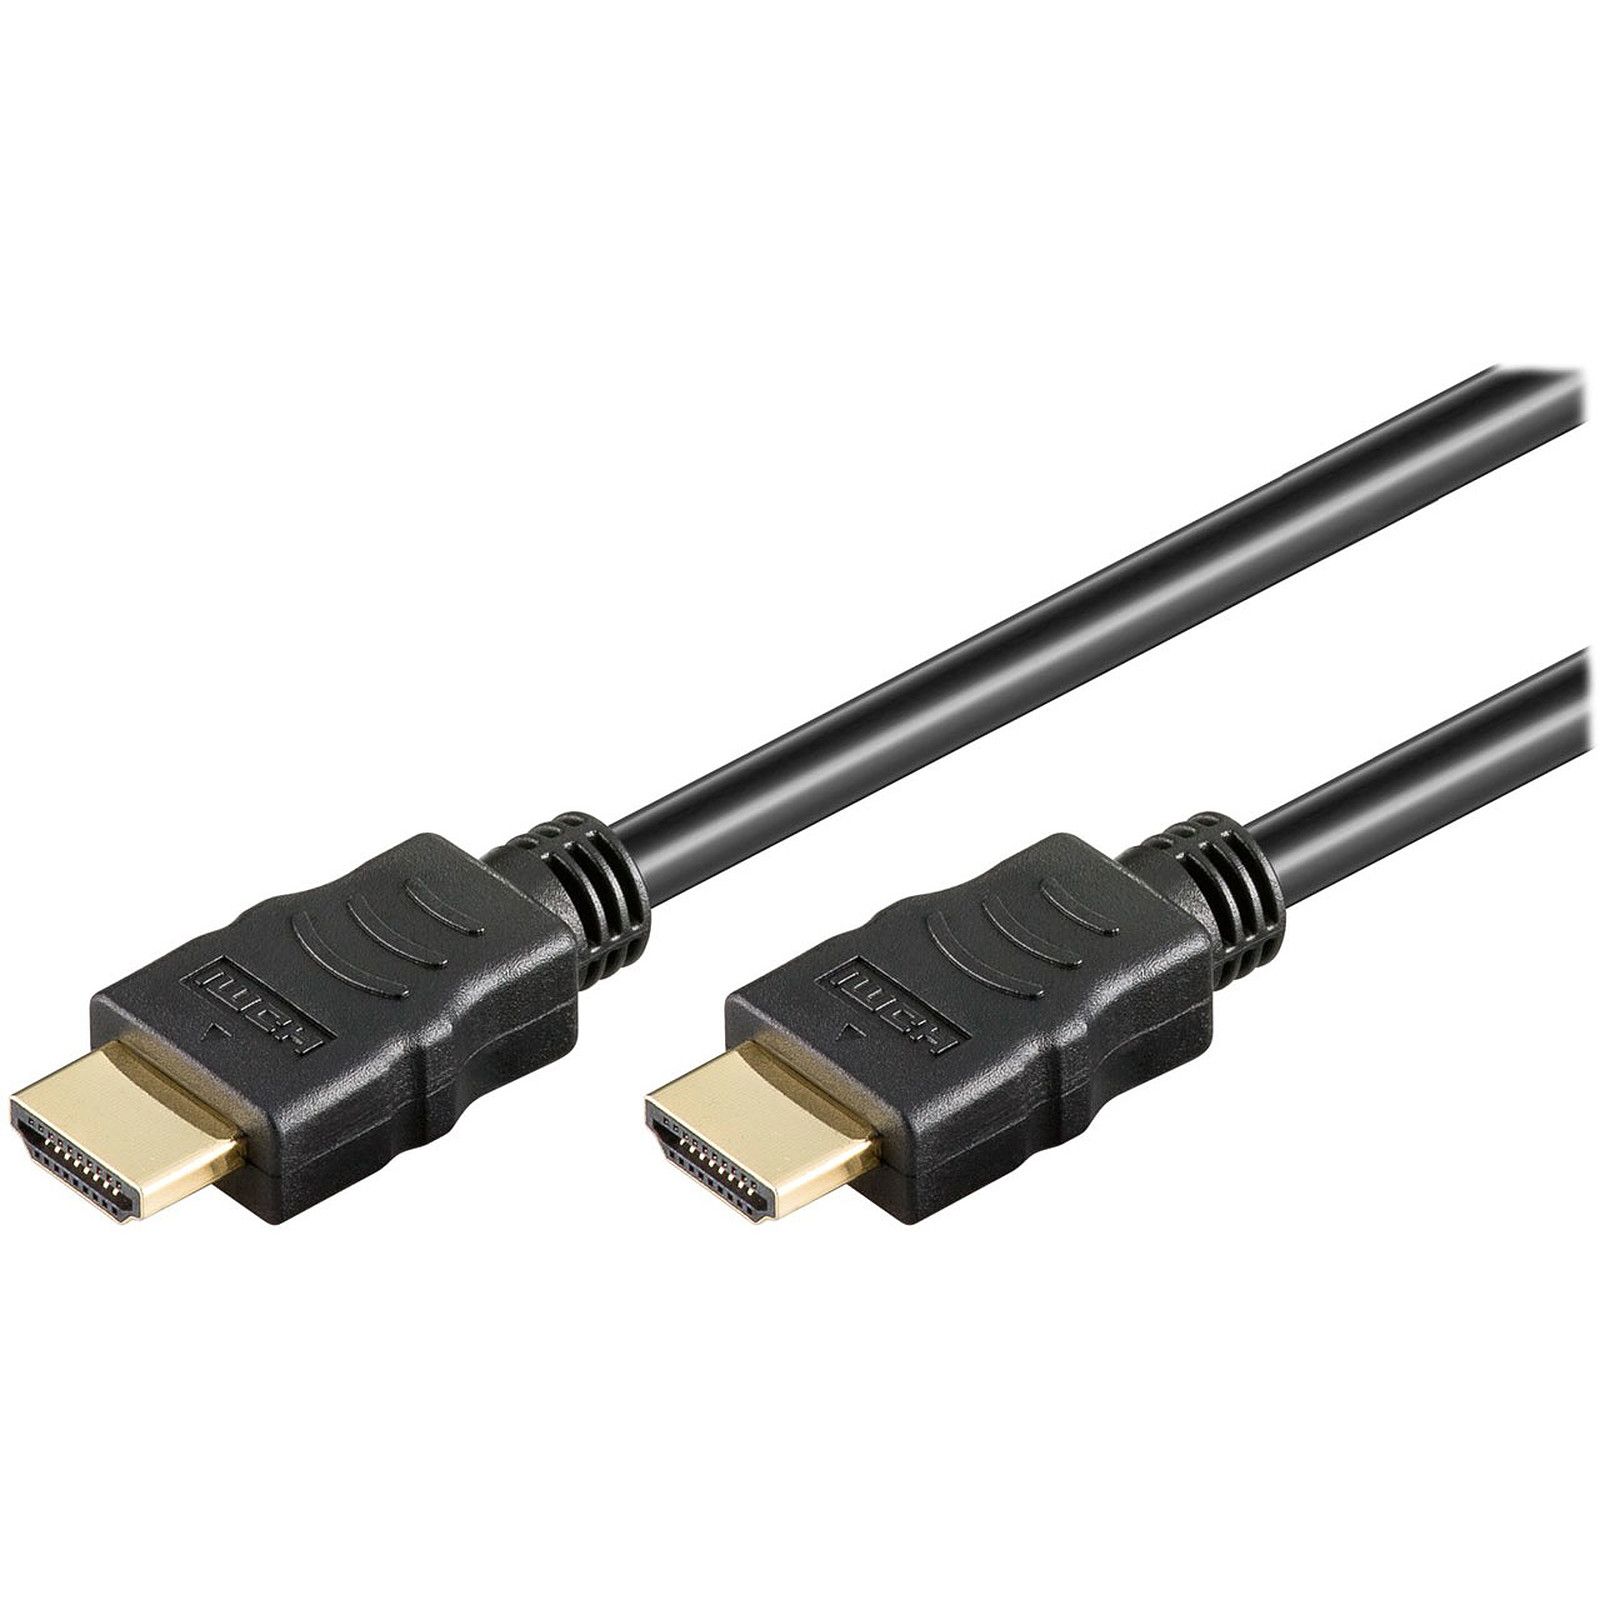 Goobay High Speed HDMI Cable with Ethernet (2 m) - HDMI Goobay